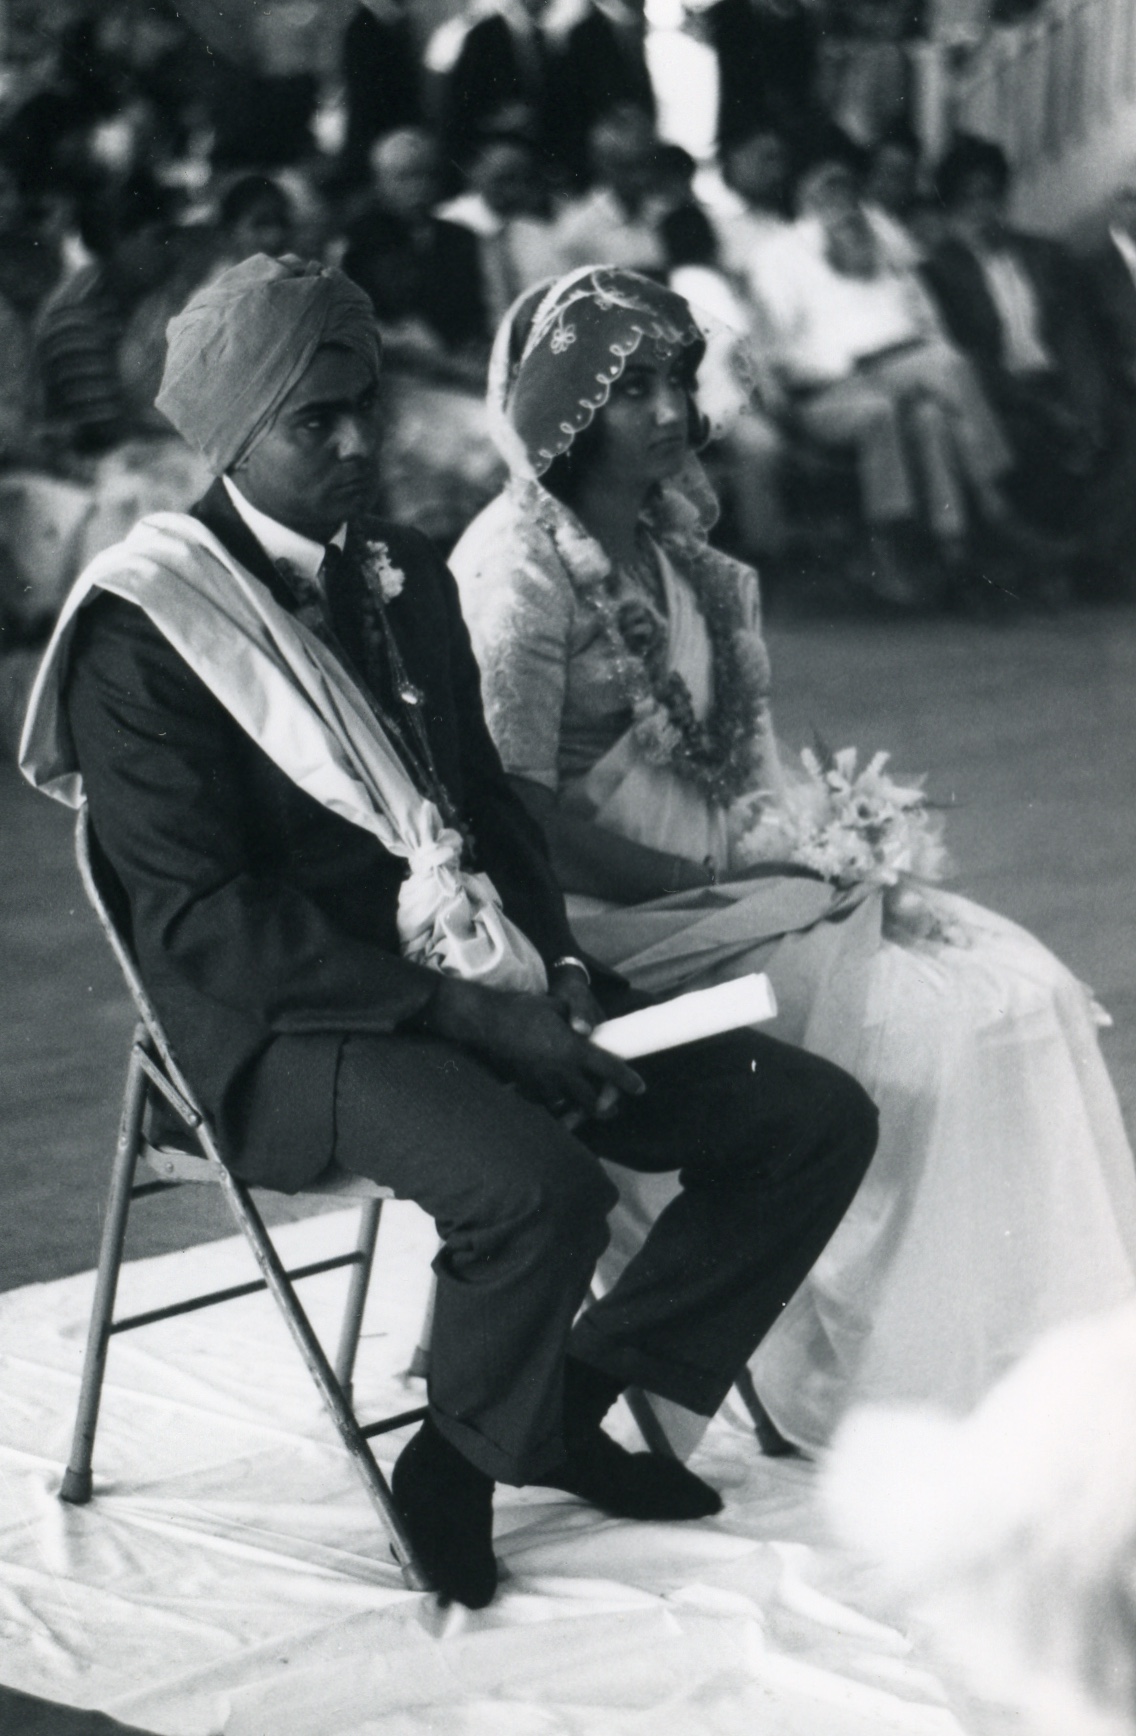 Didar Singh Bains and Santi Poonian Wedding, Marysville Hall, June 21, 1964, Marysville, CA. Courtesy of the Bains Family and the Punjabi American Heritage Society.